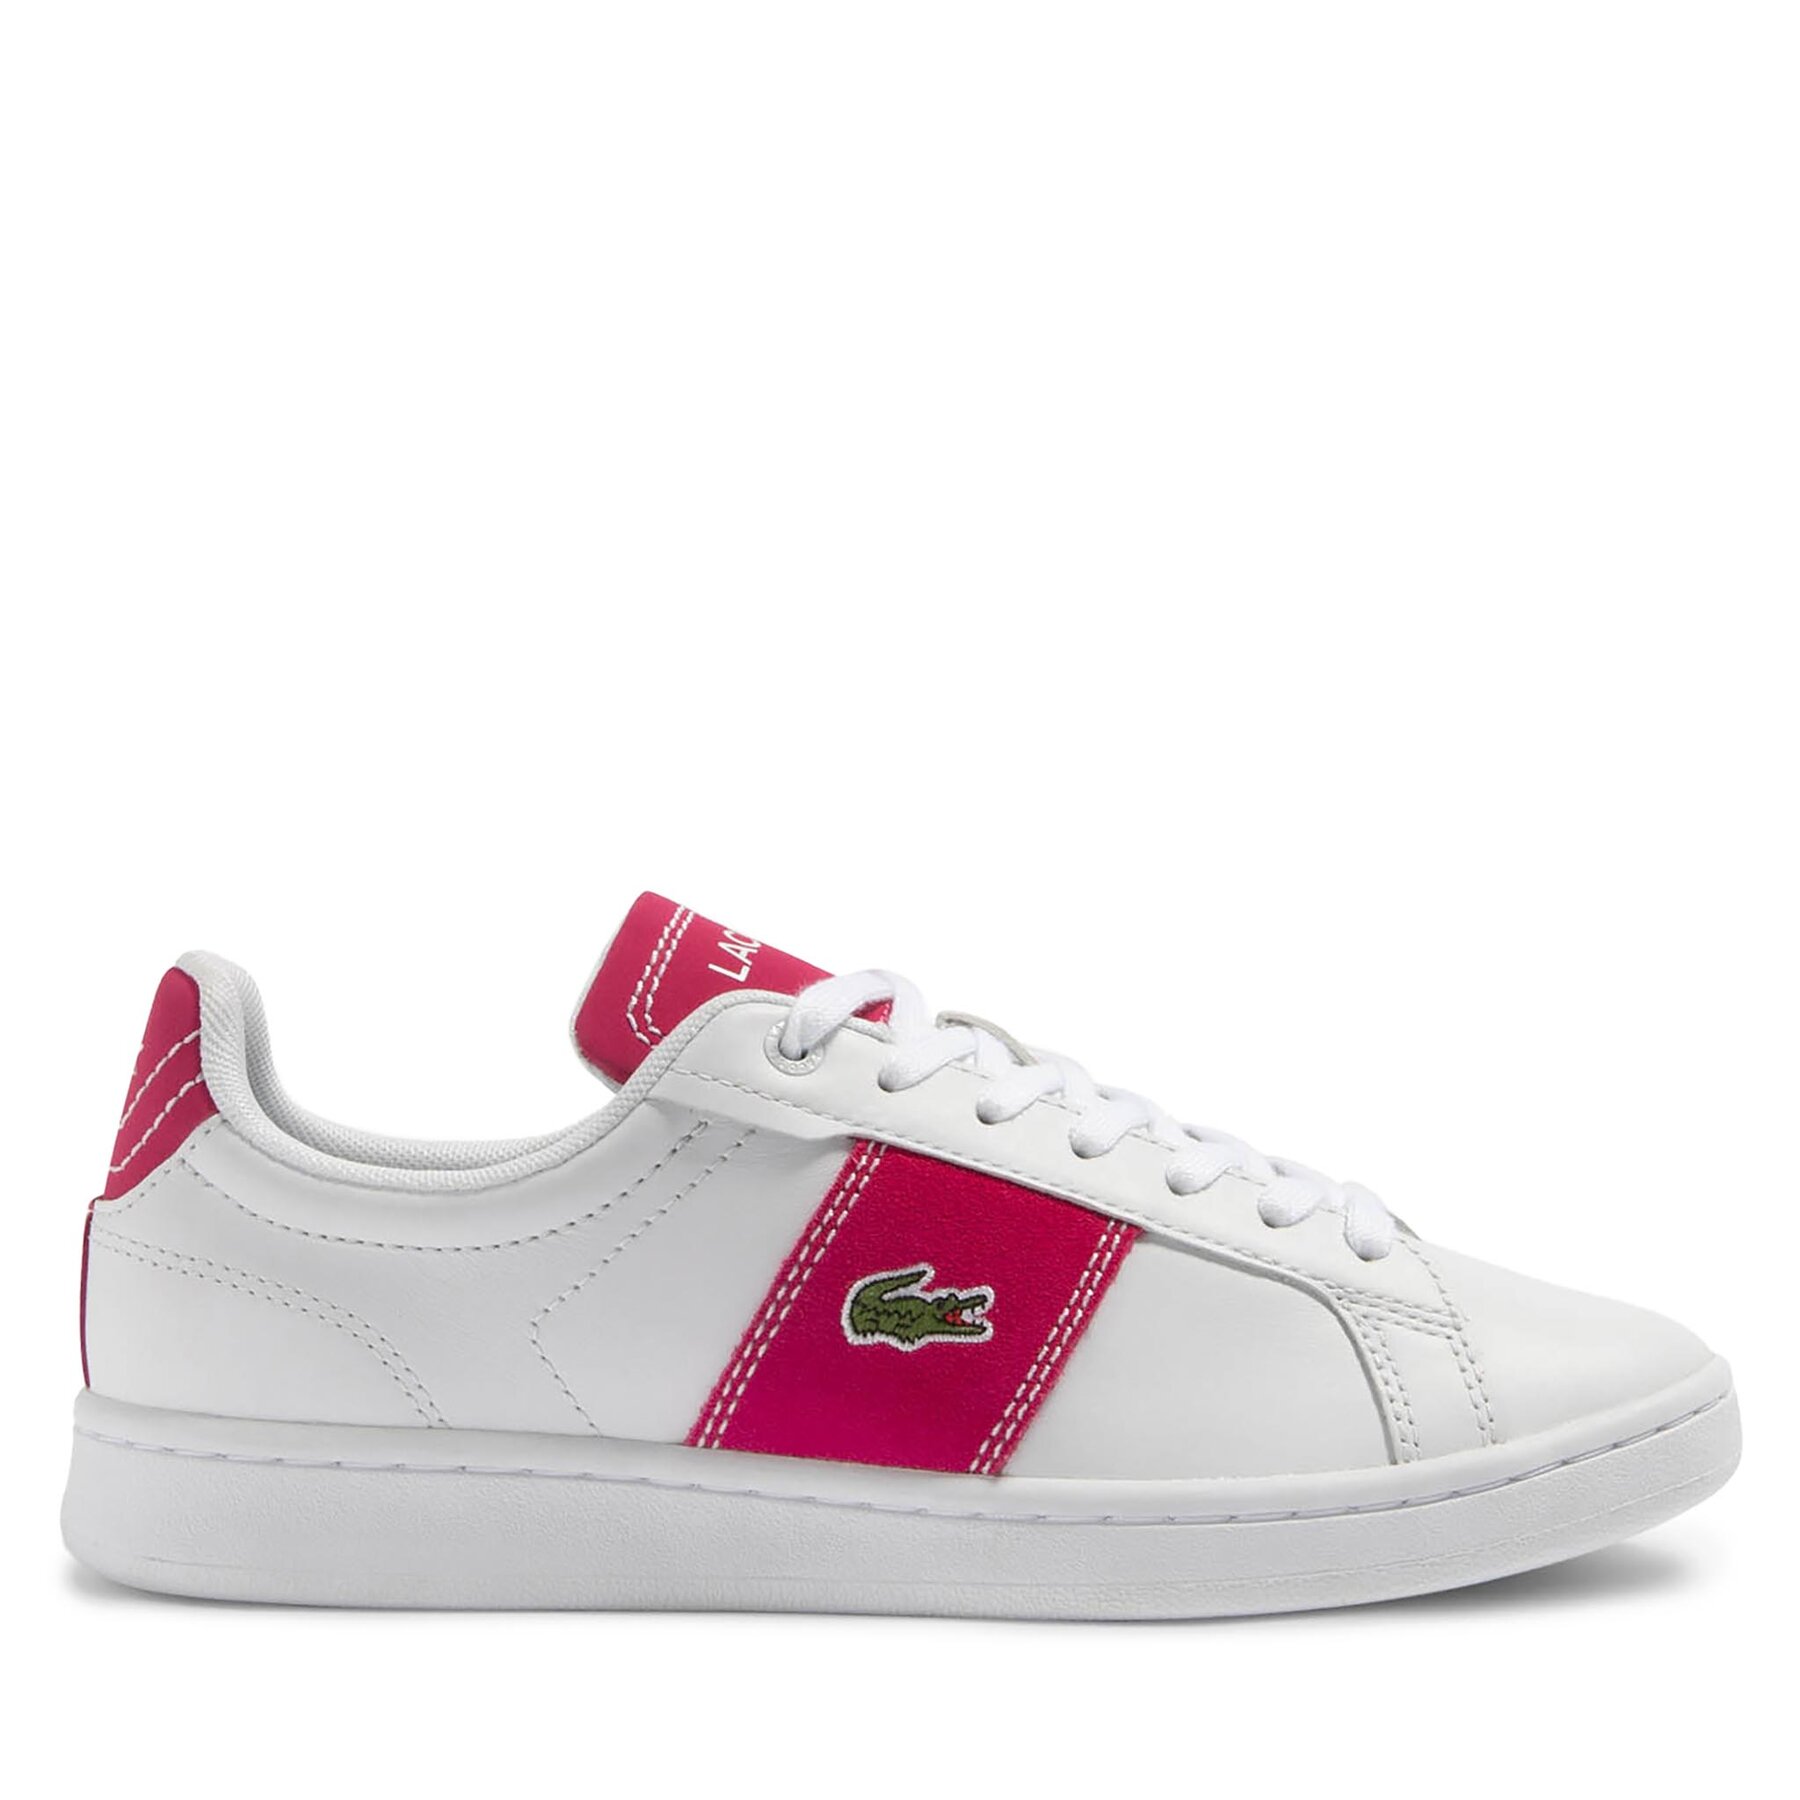 Sneakers Lacoste Carnaby Pro Cgr 2234 Sfa Wht/Pnk von Lacoste